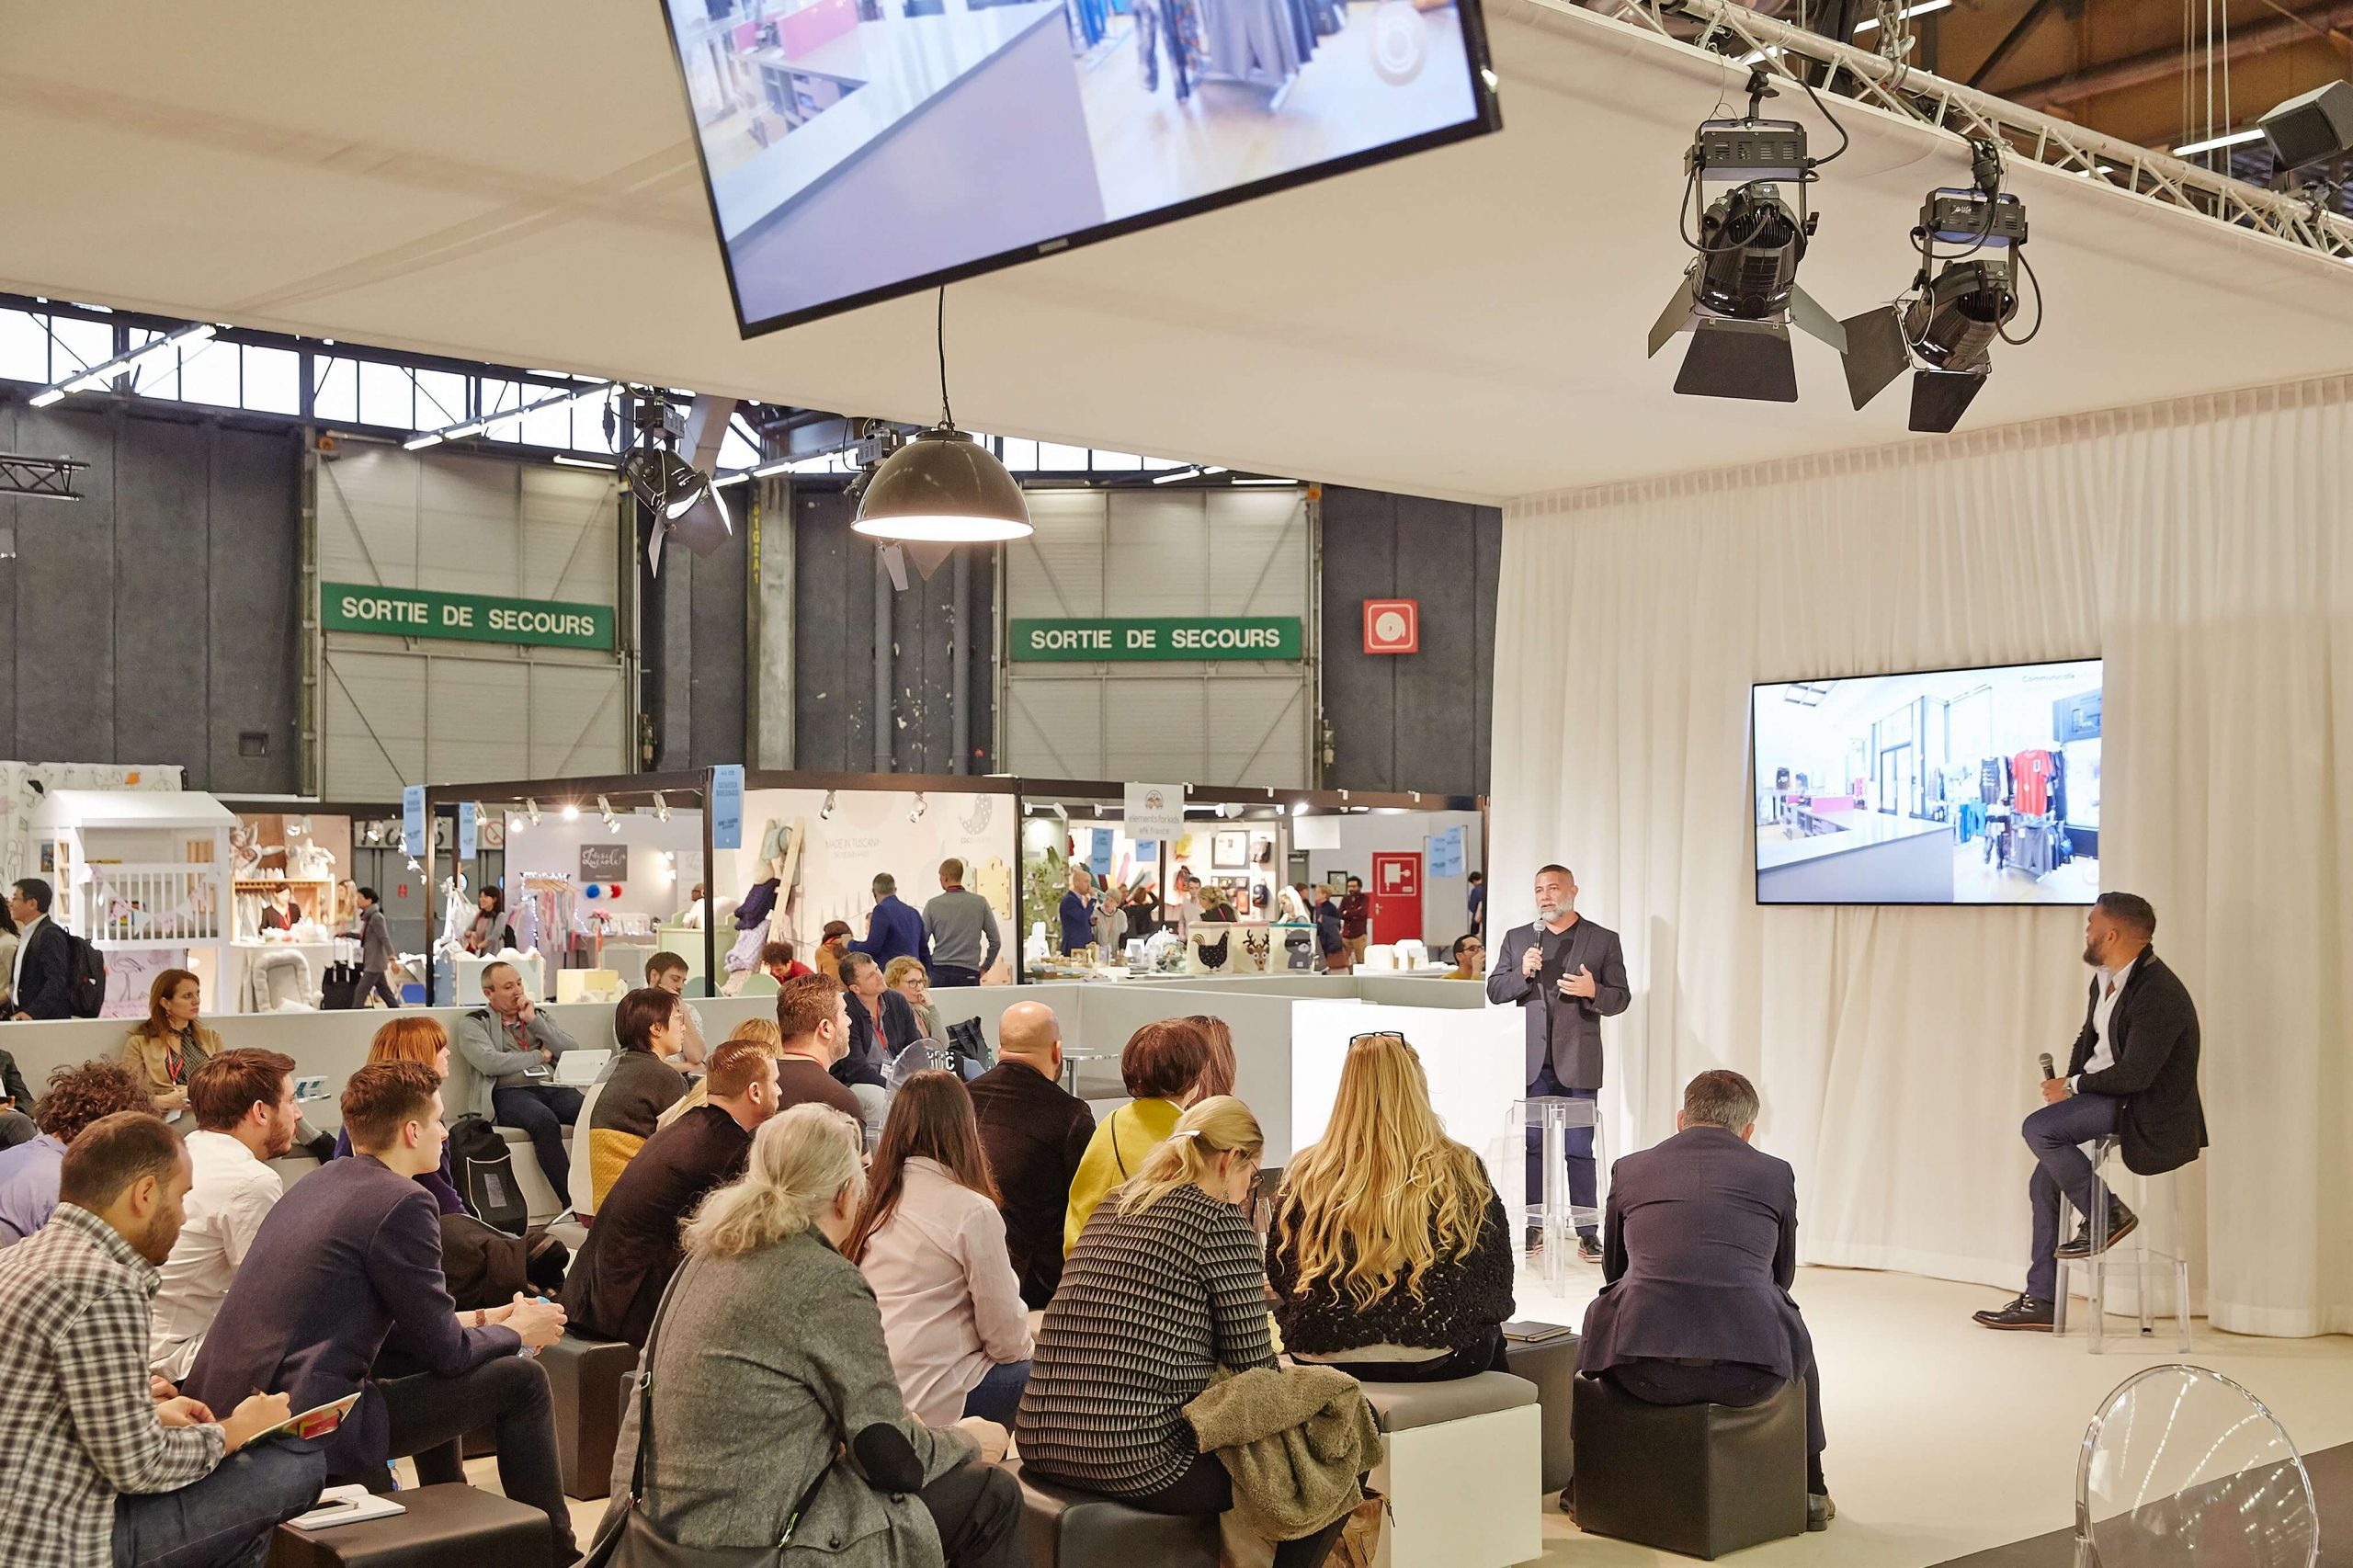 David Charette and Jay Britto present at Maison&Objet Talks in 2018